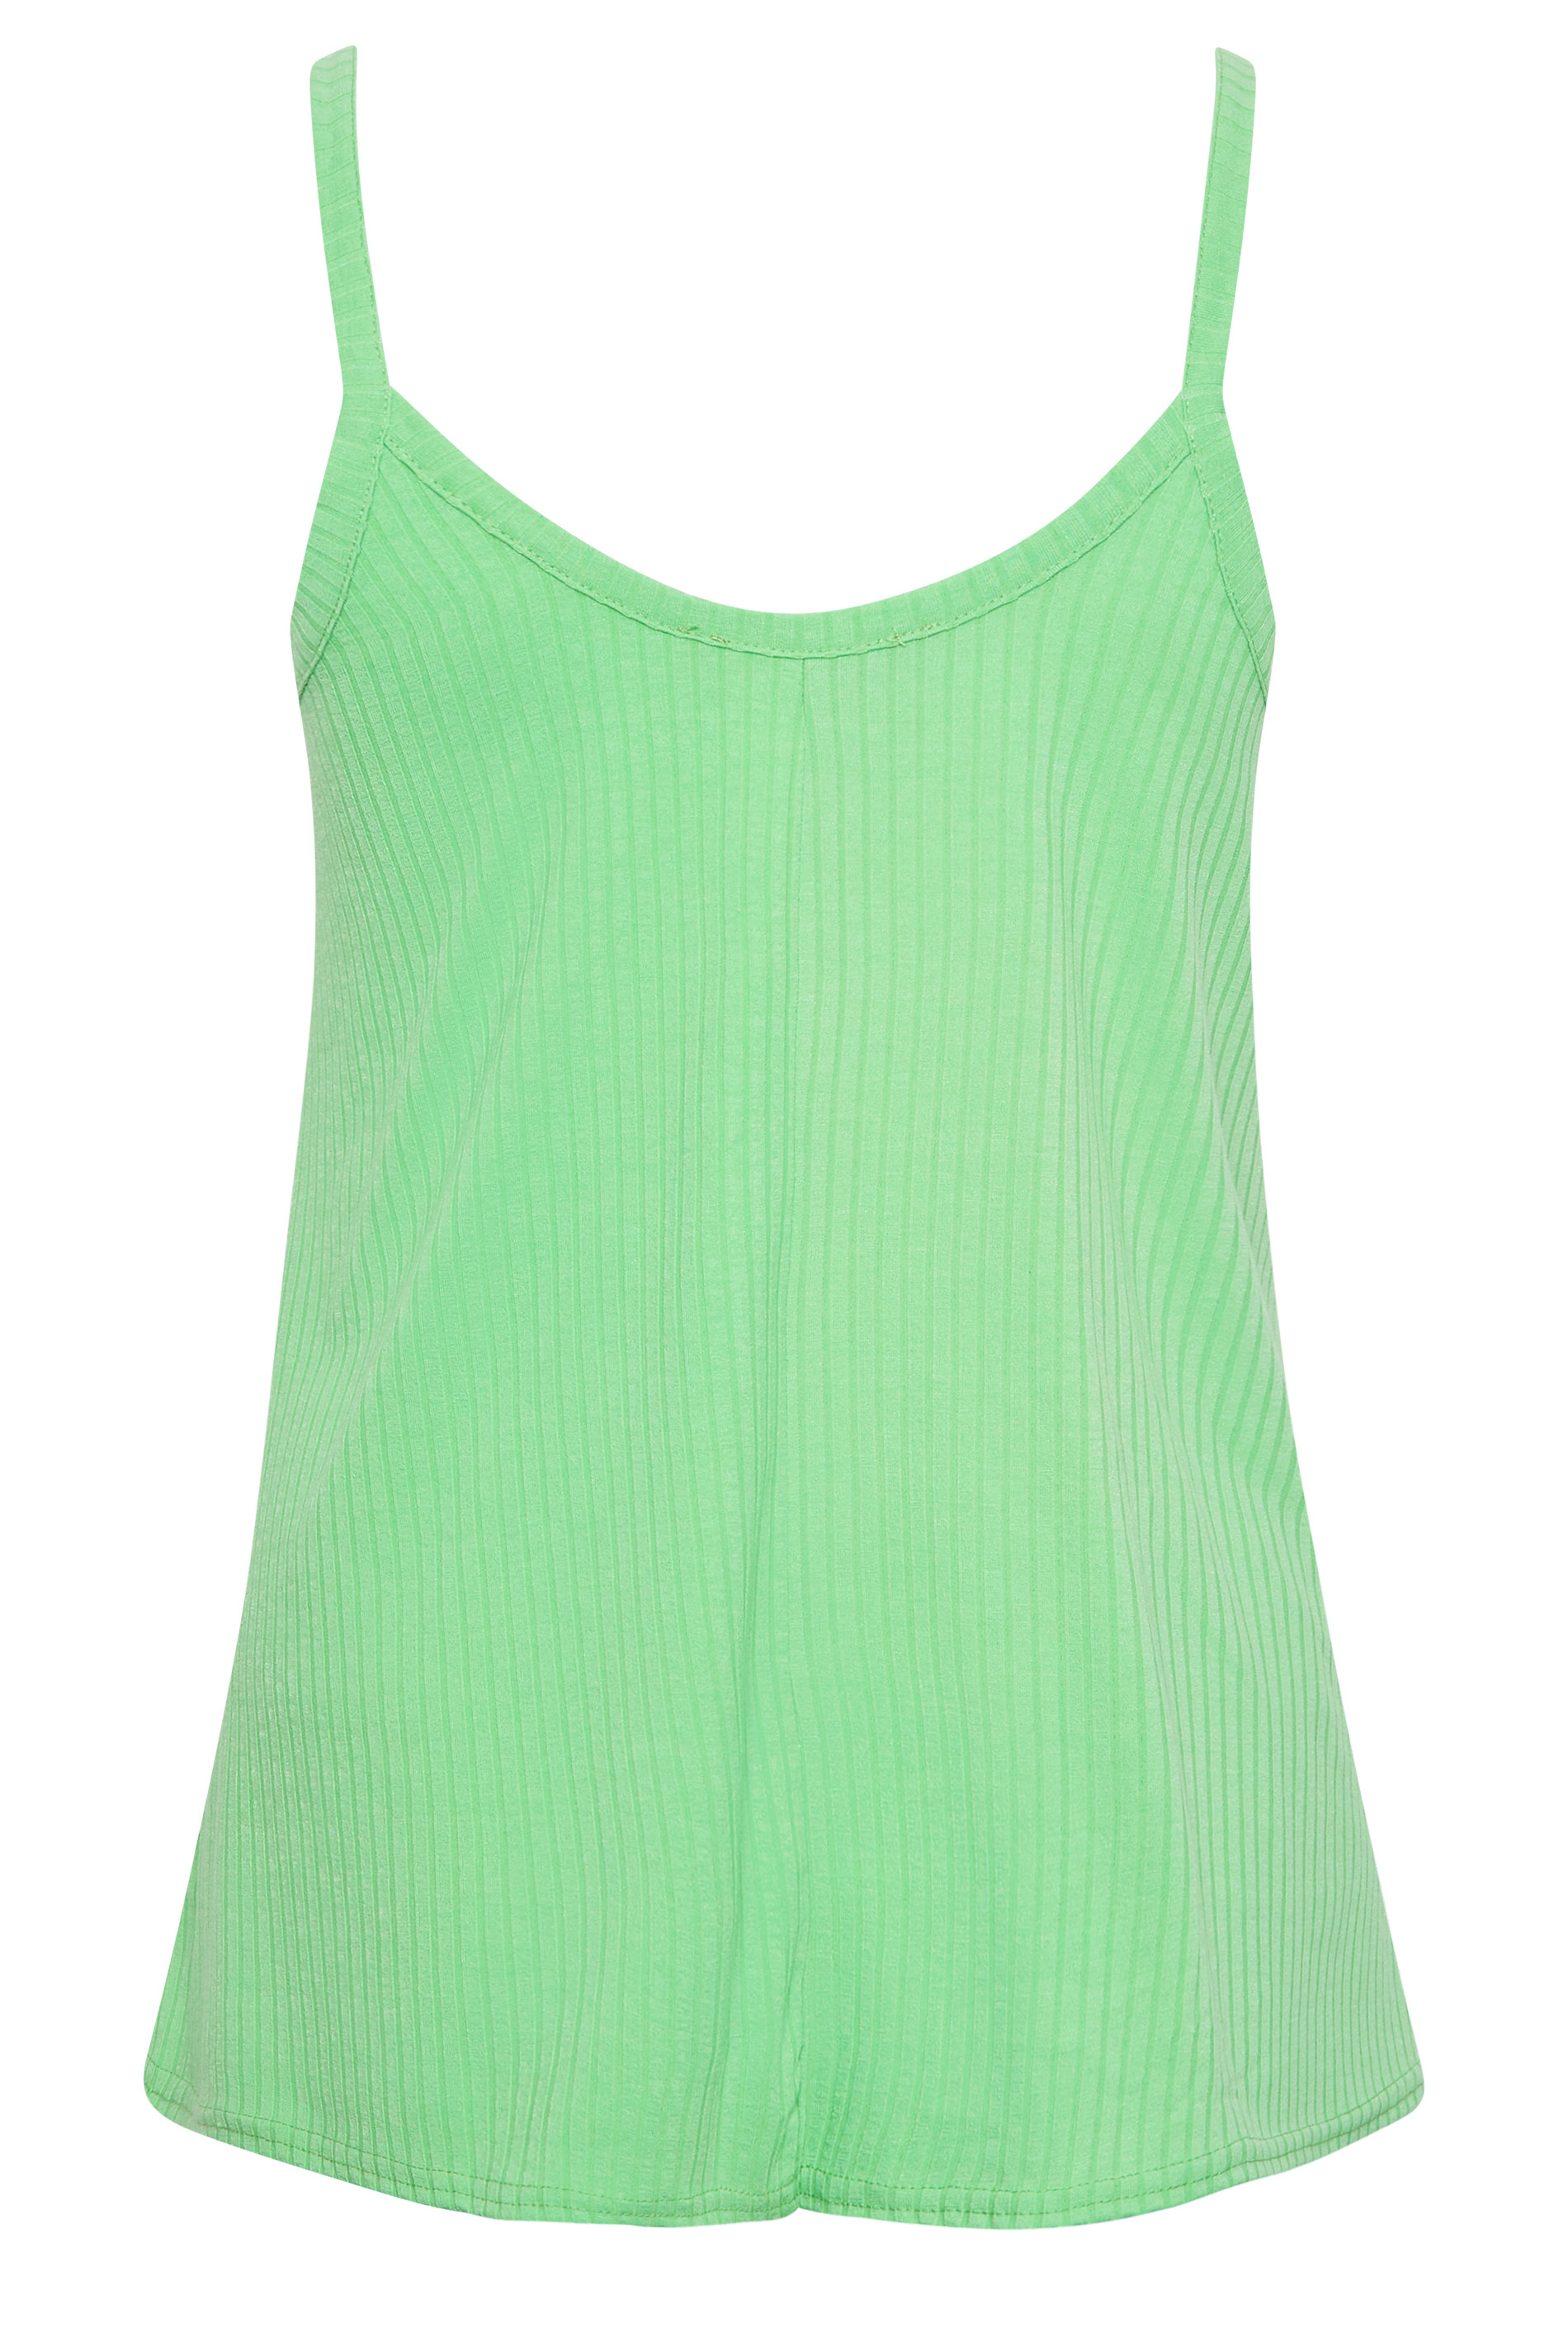 LIMITED COLLECTION Plus Size Green Ribbed Button Cami Vest Top | Yours ...